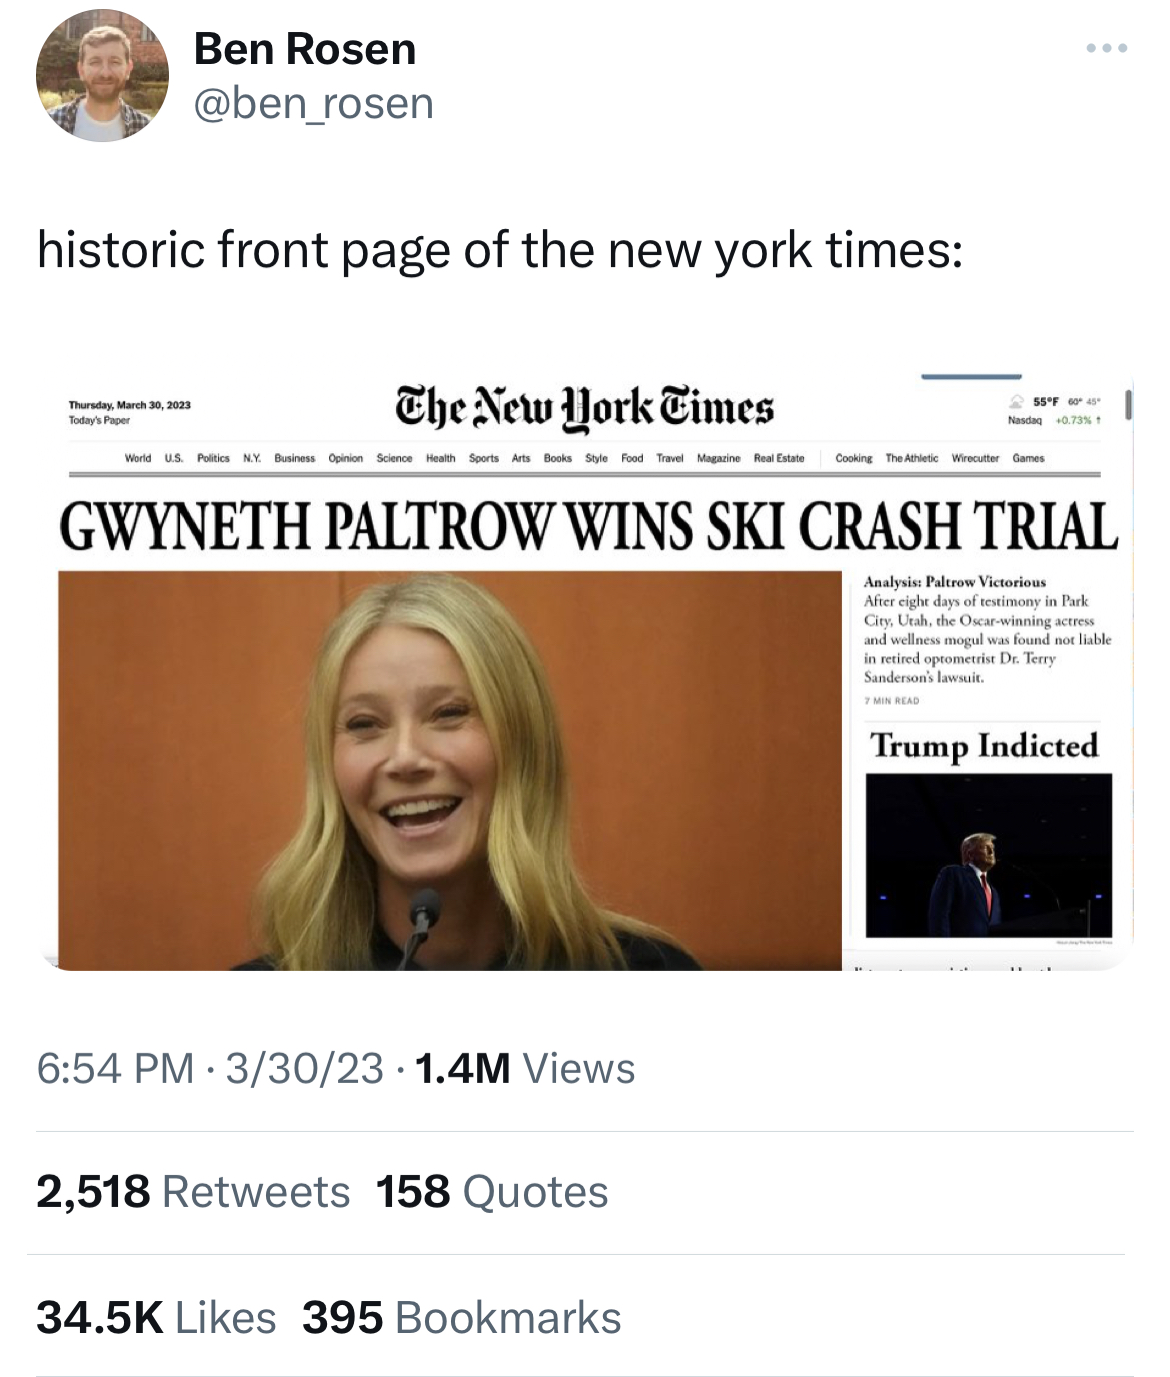 Tweets of the week - new york times - Ben Rosen historic front page of the new york times The New York Times Gwyneth Paltrow Wins Ski Crash Trial Any Pv i f Co 33023.1.4M Views 2,518 158 Quotes 395 Bookmarks was fo De Te S The Trump Indicted